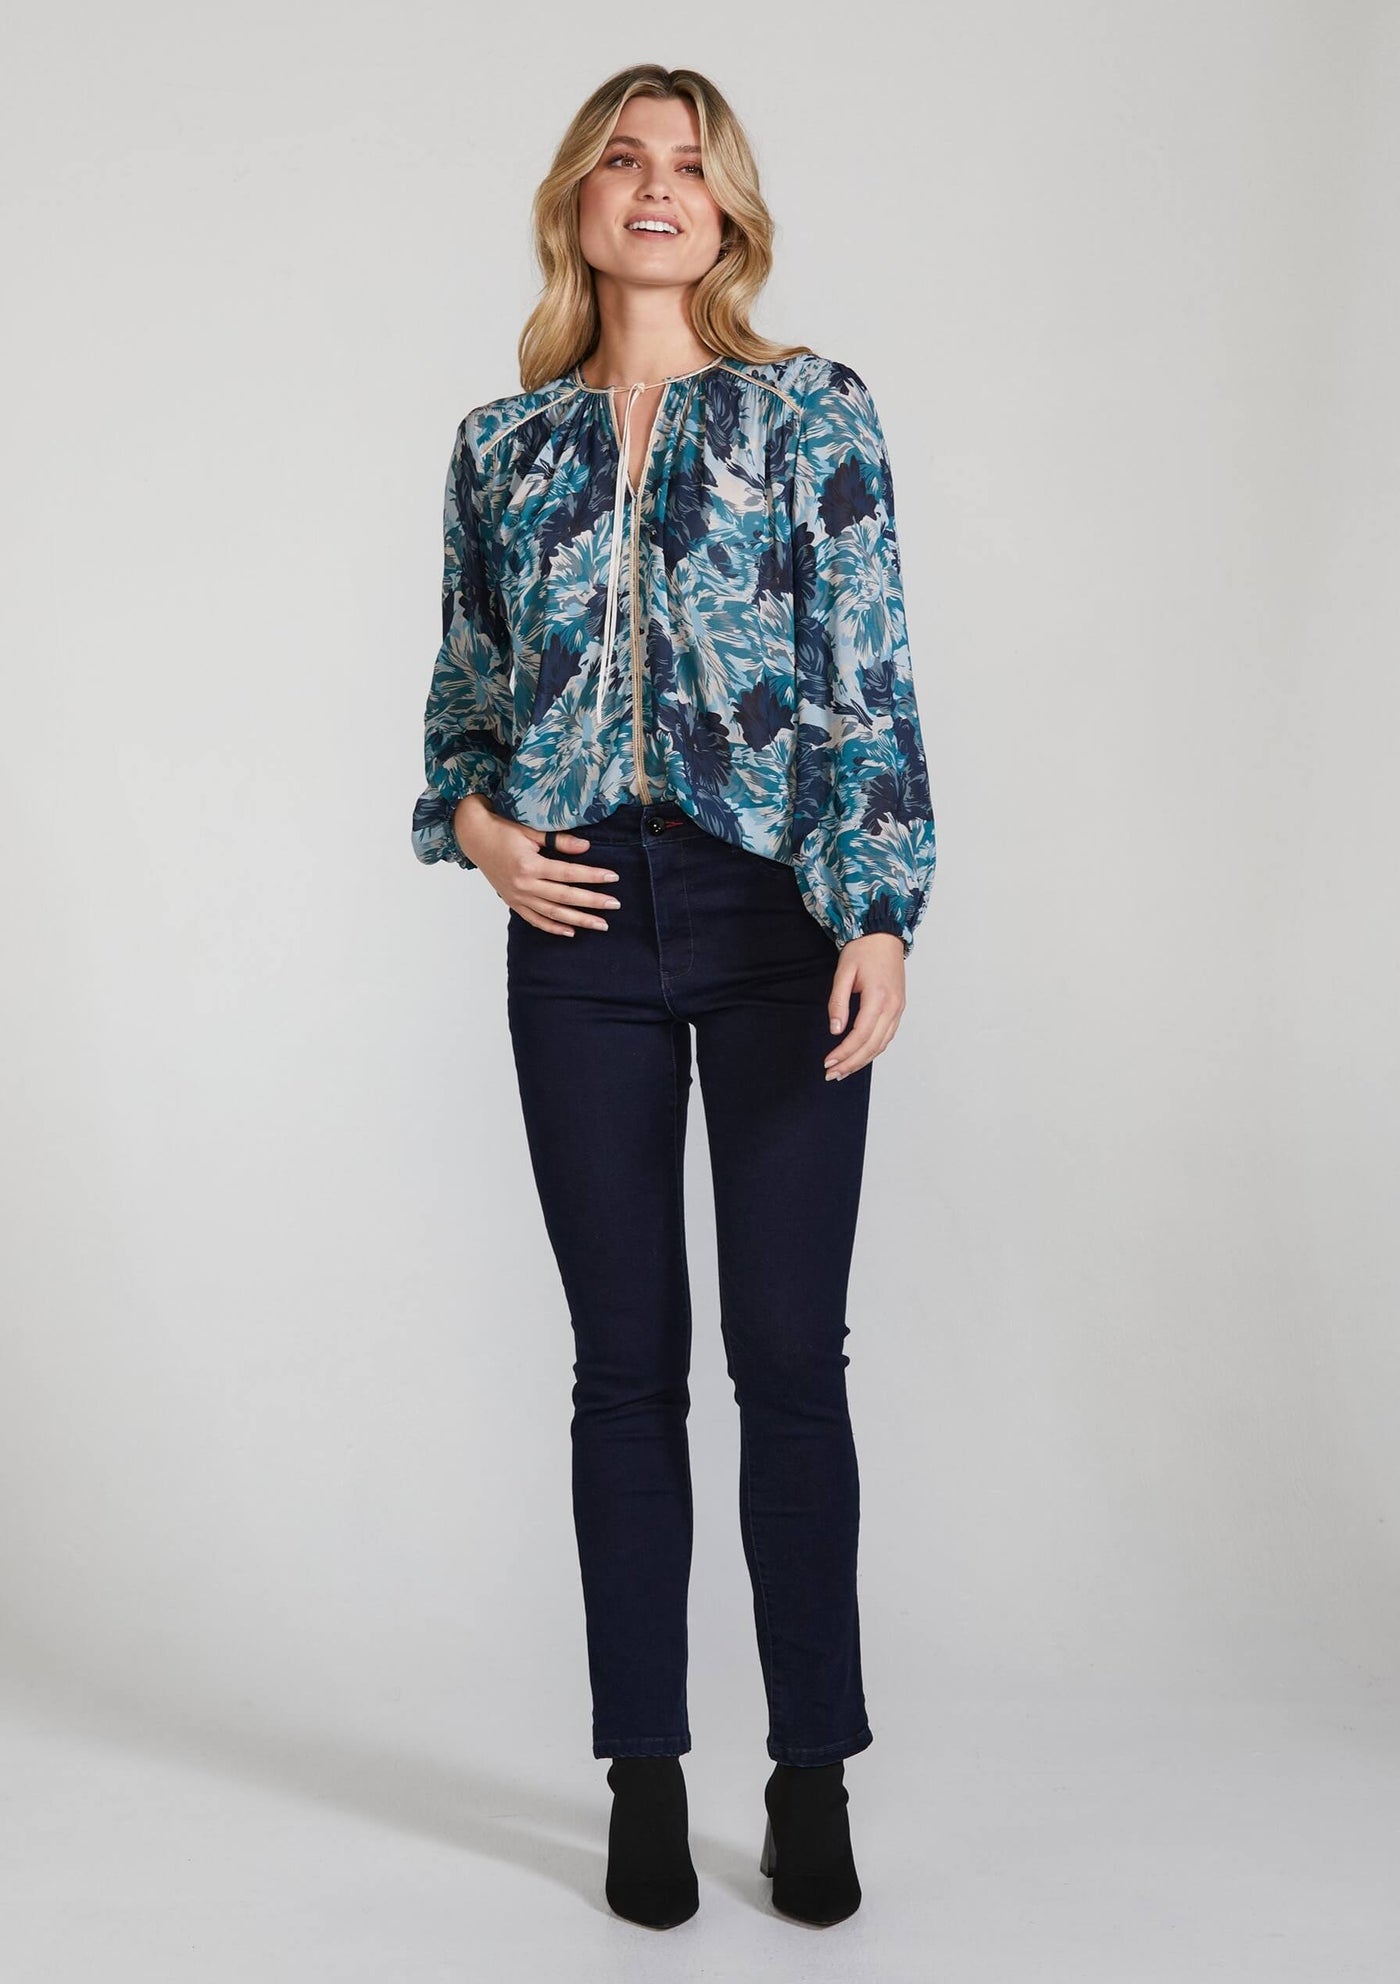 Adore Blouse - Teal